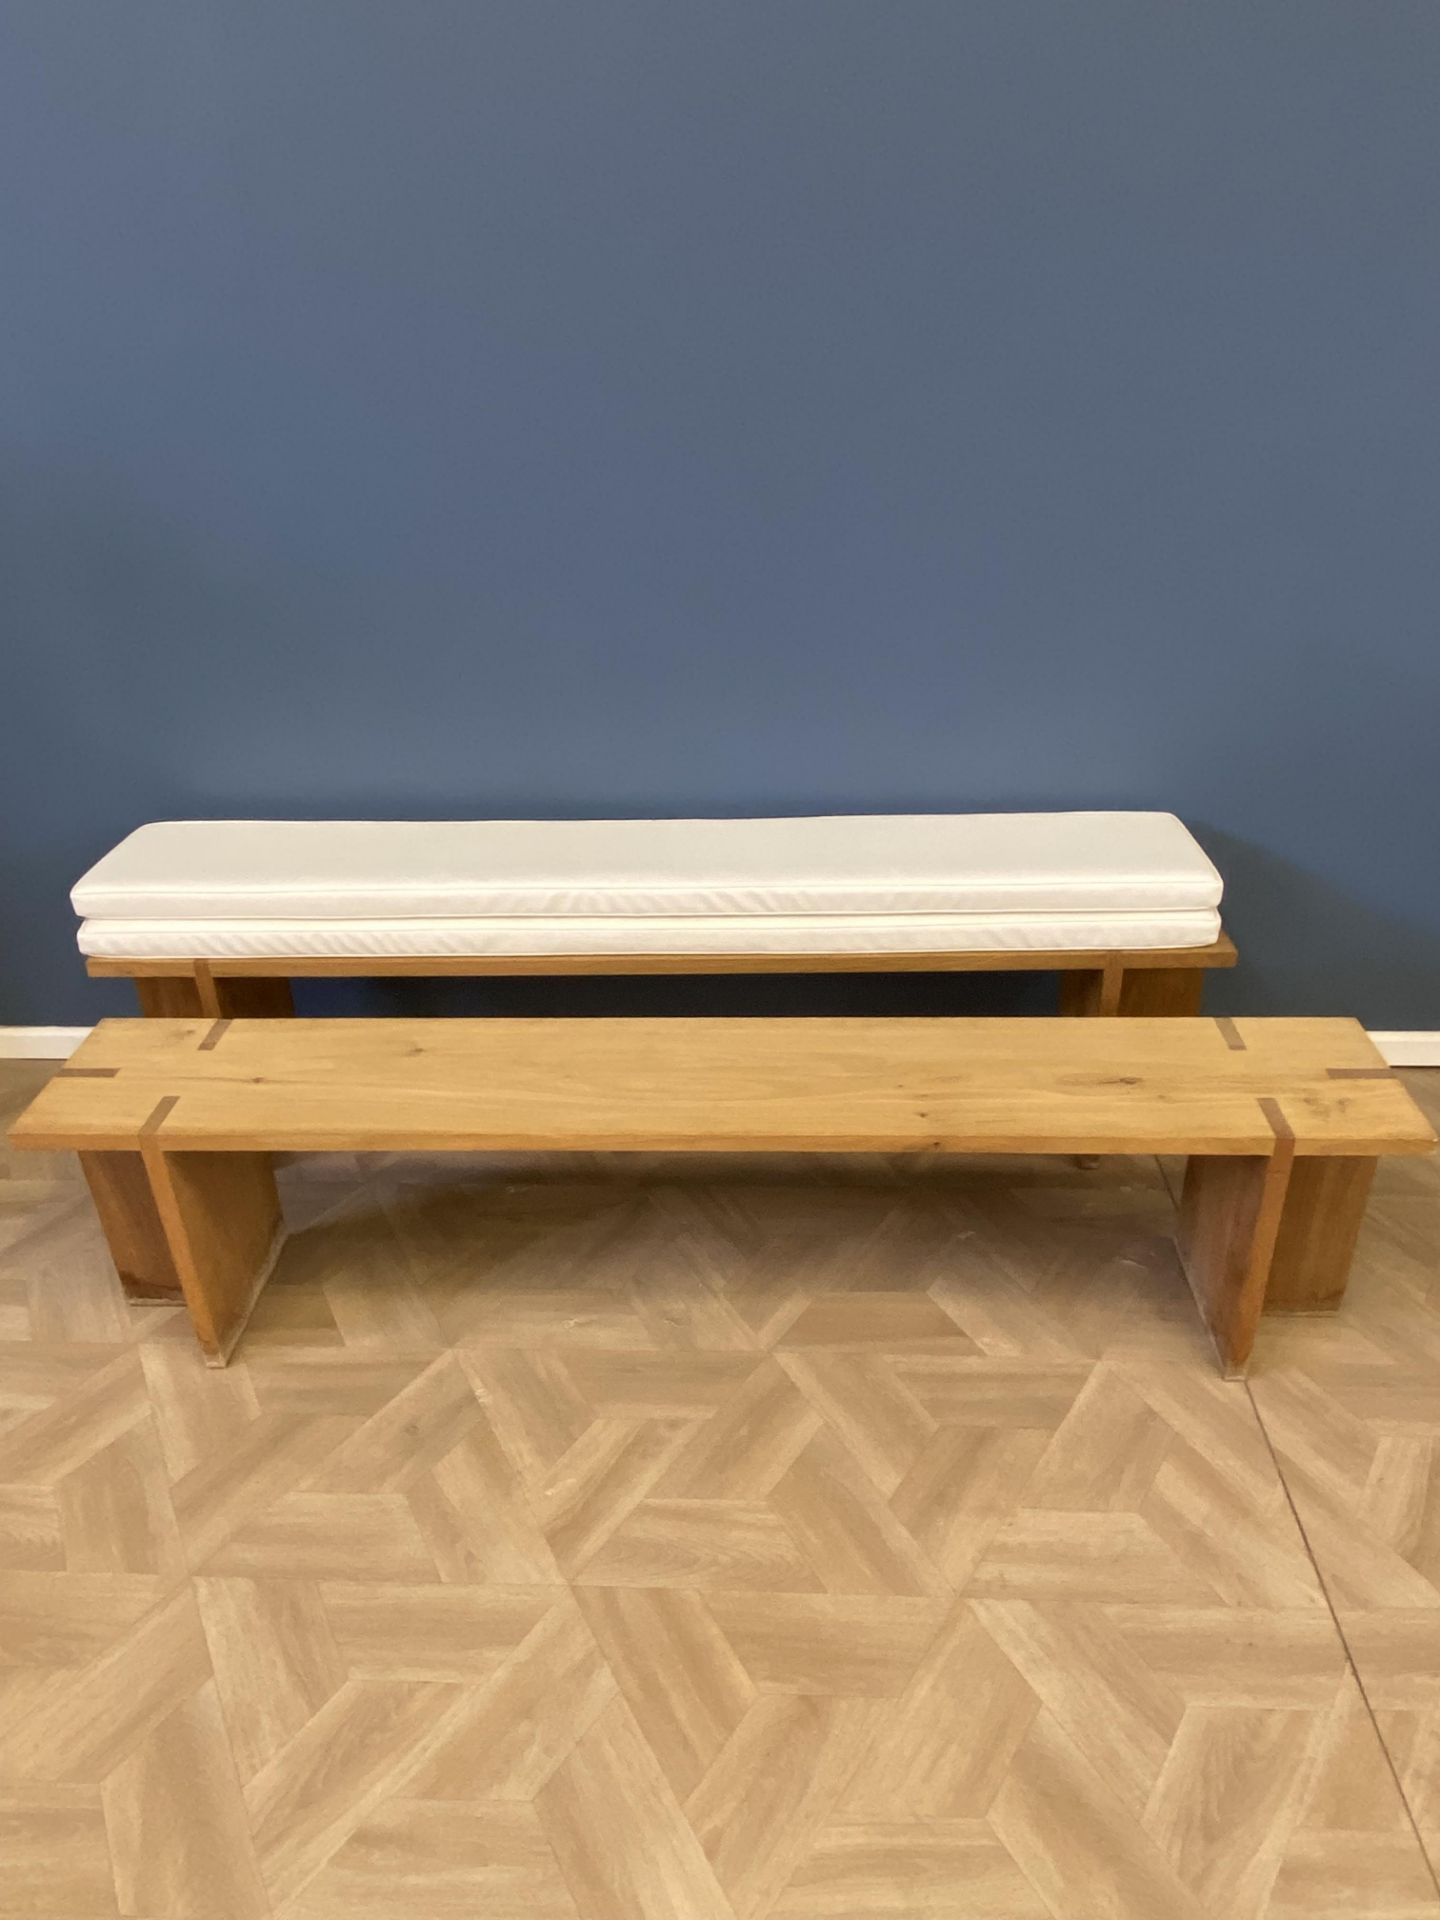 Pair of solid oak pool benches - Image 4 of 7